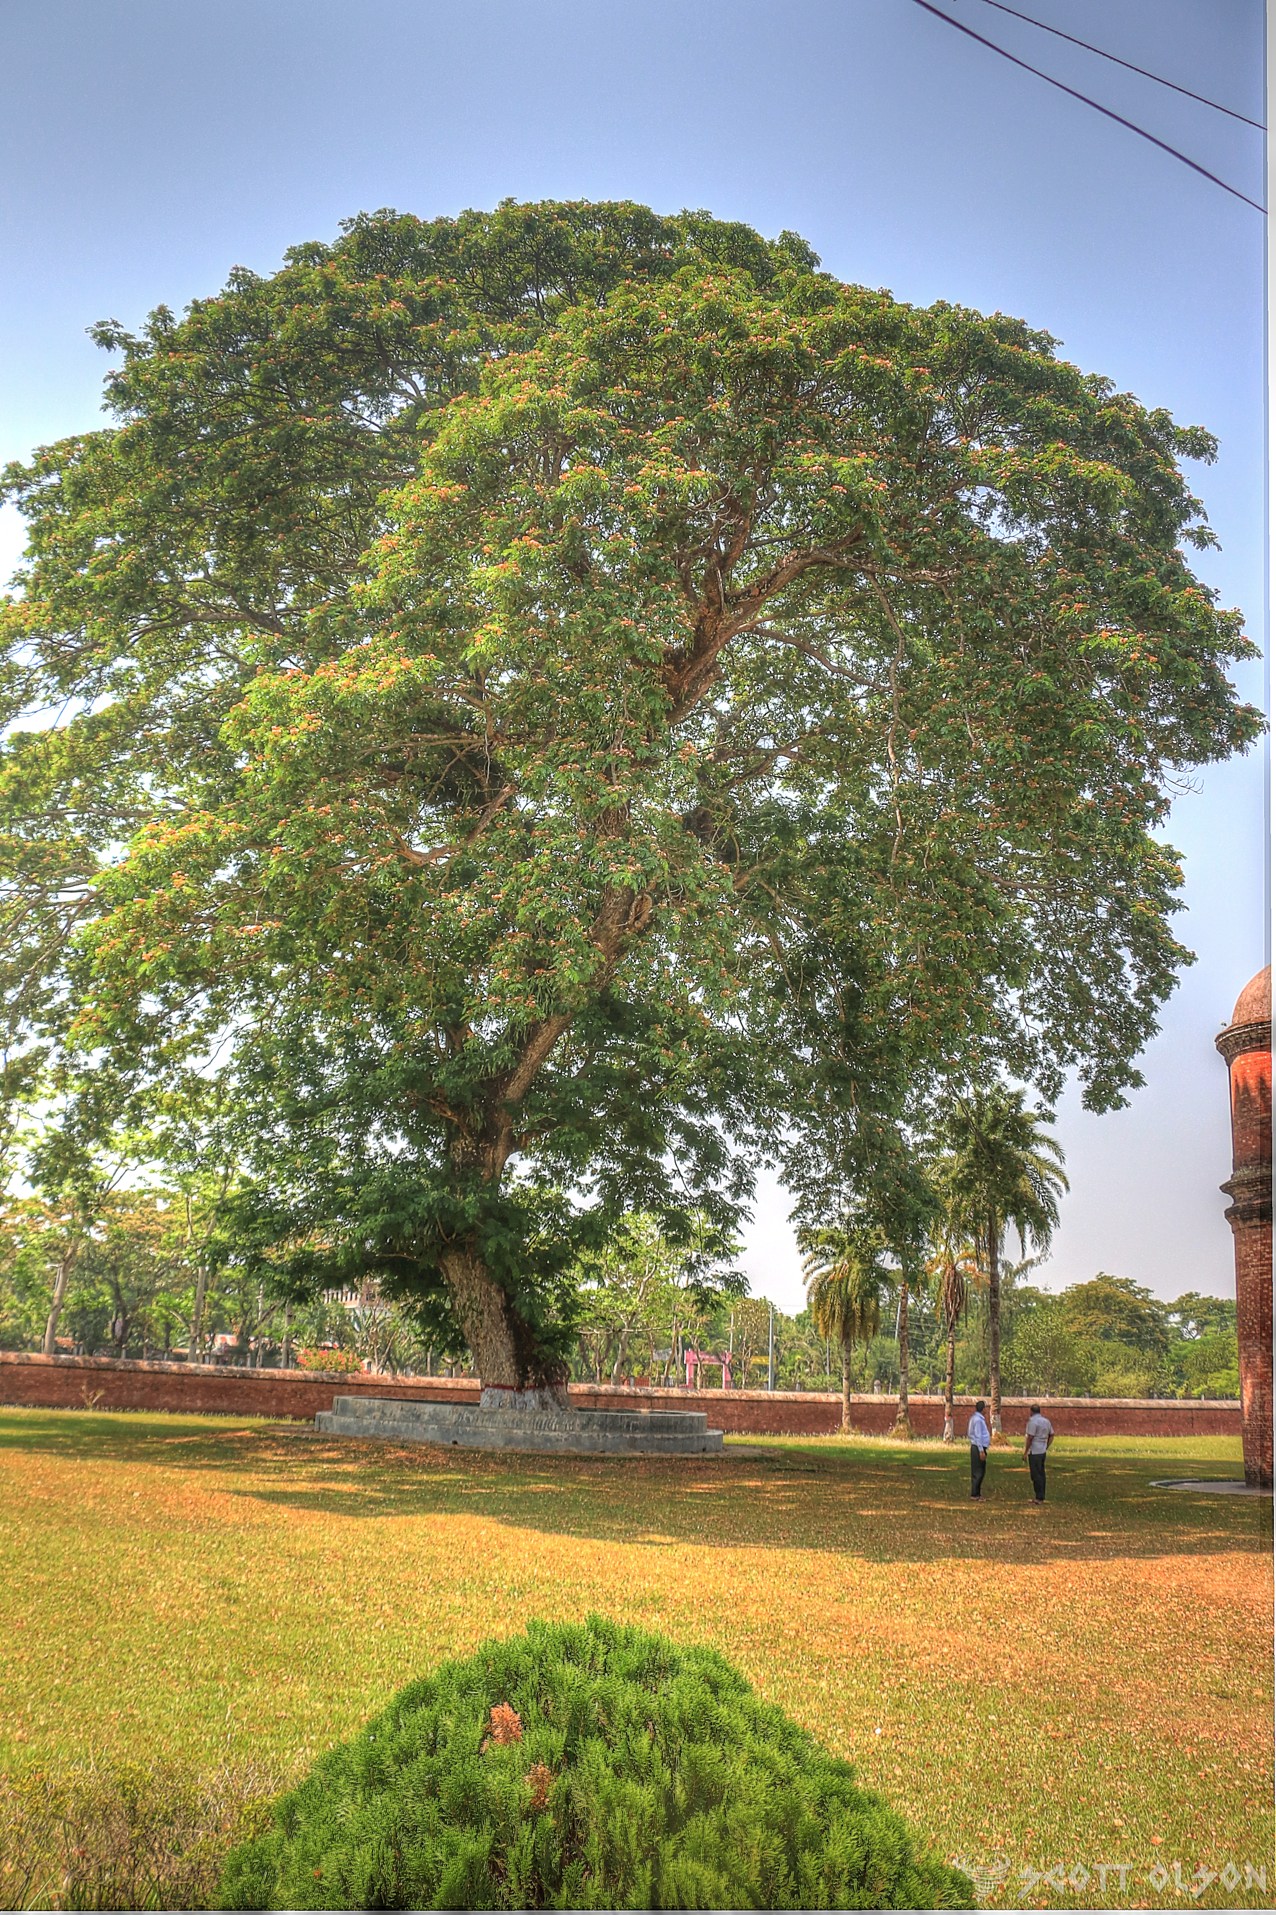 sixty-dome-mosque-old-large-tree